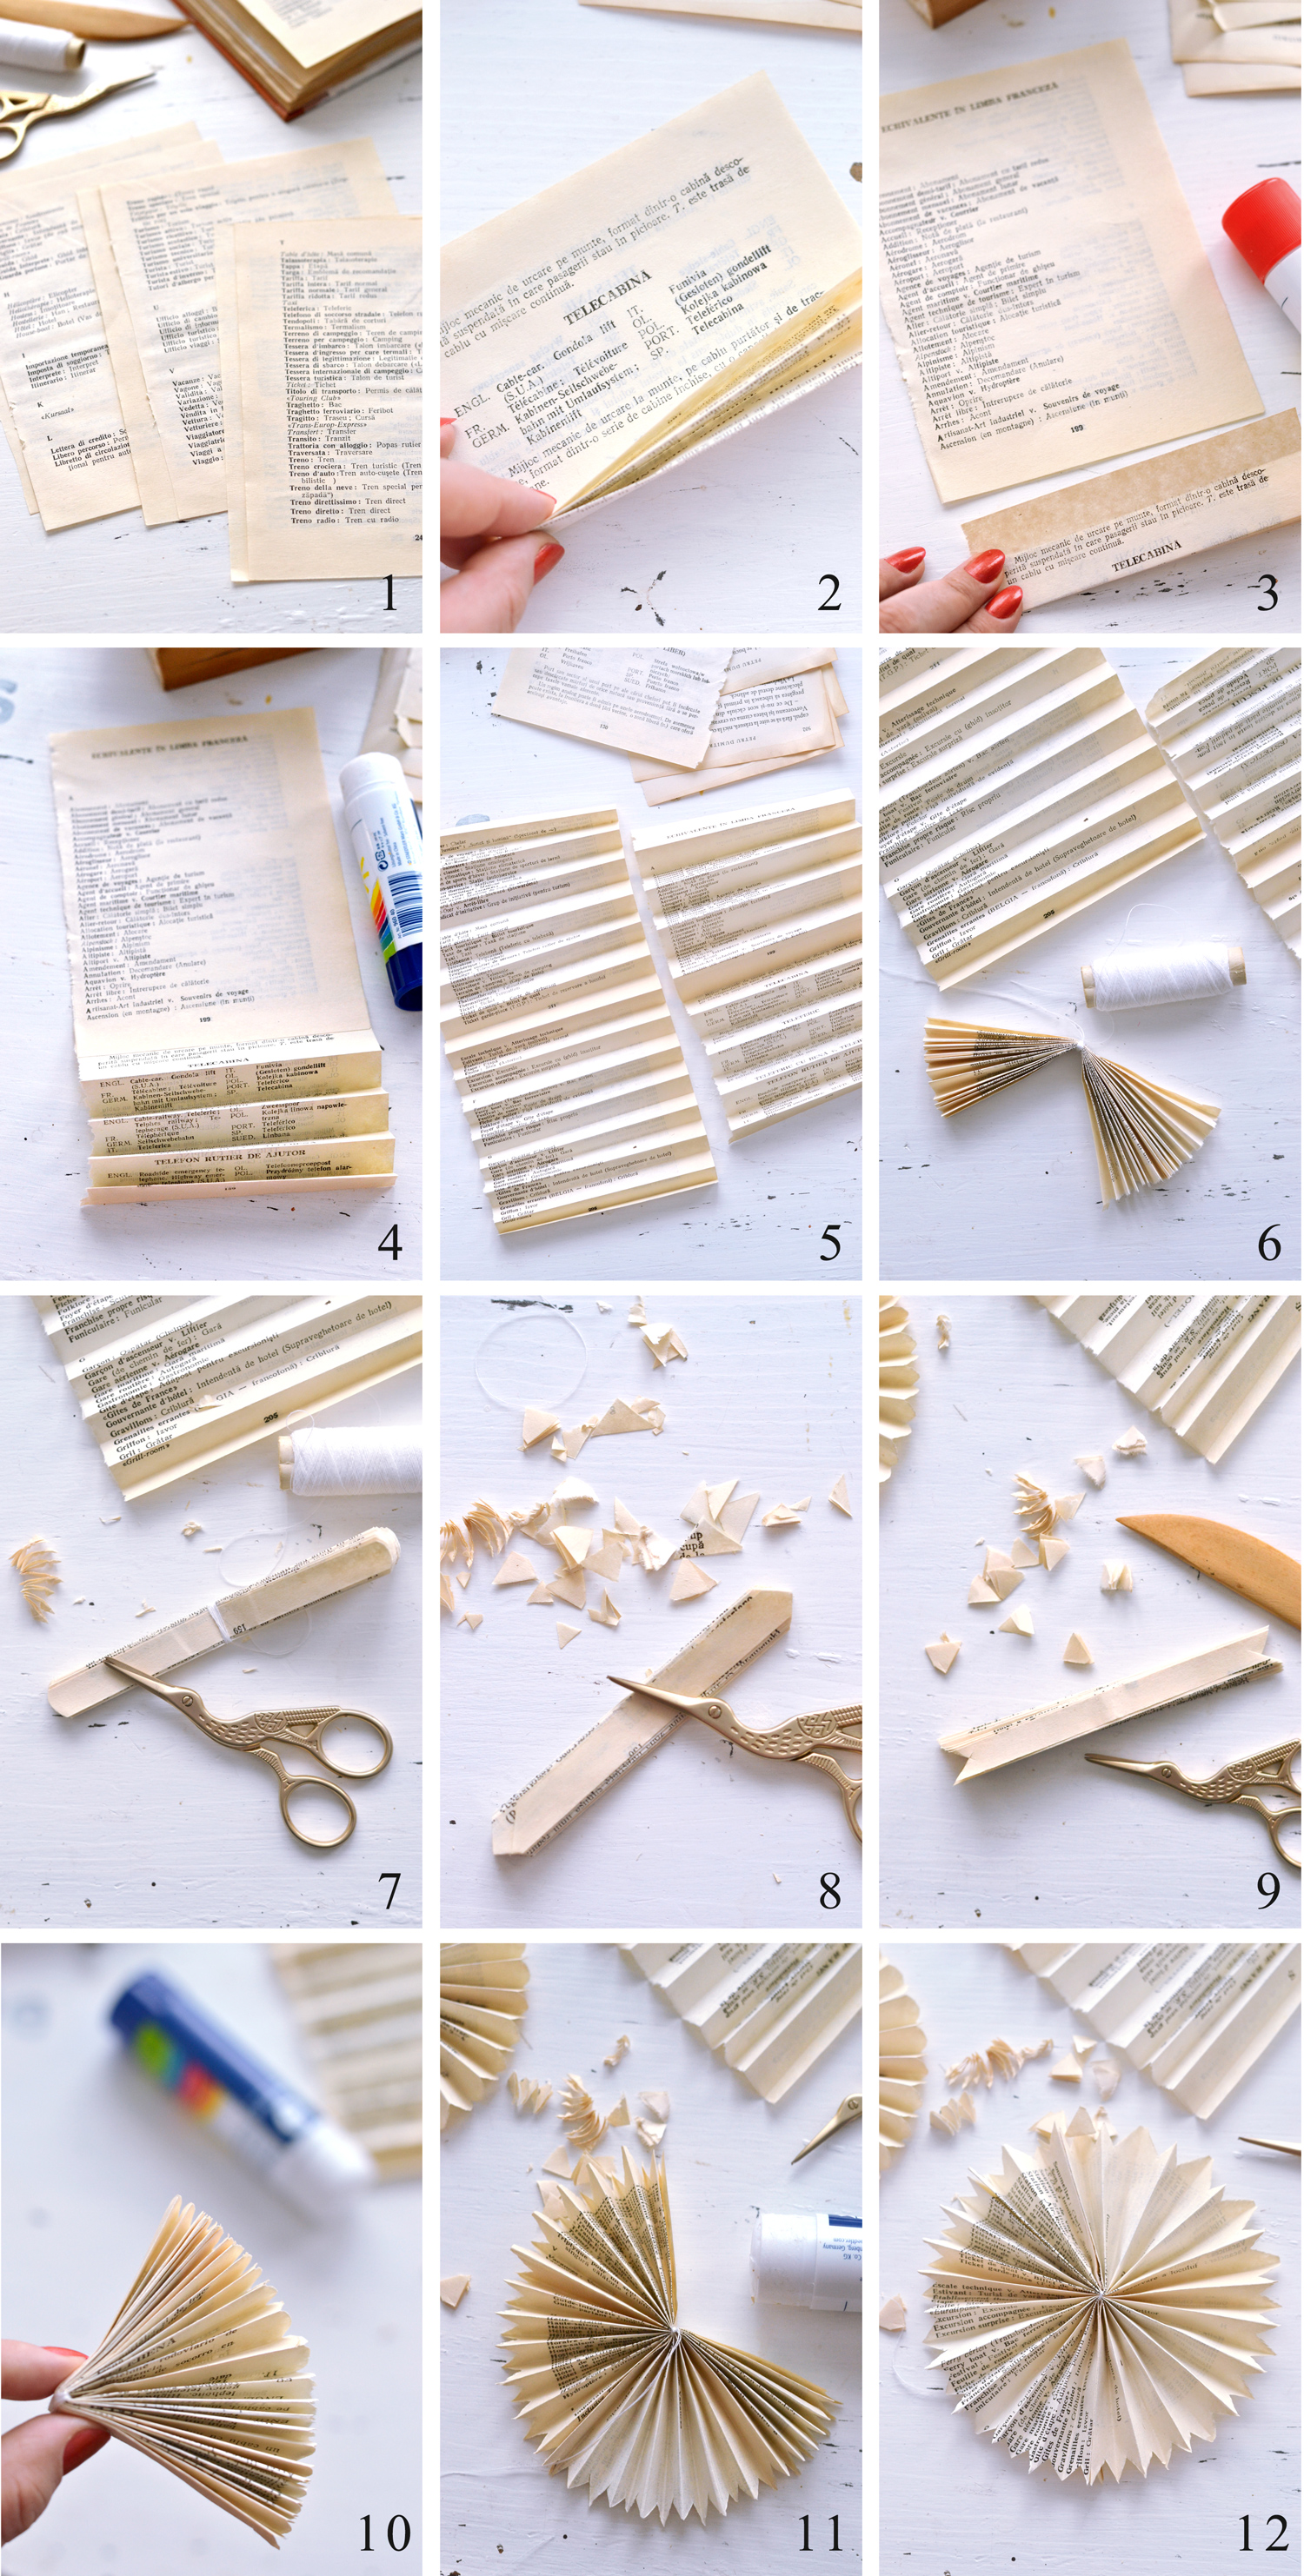 step by step instruction for paper rosette